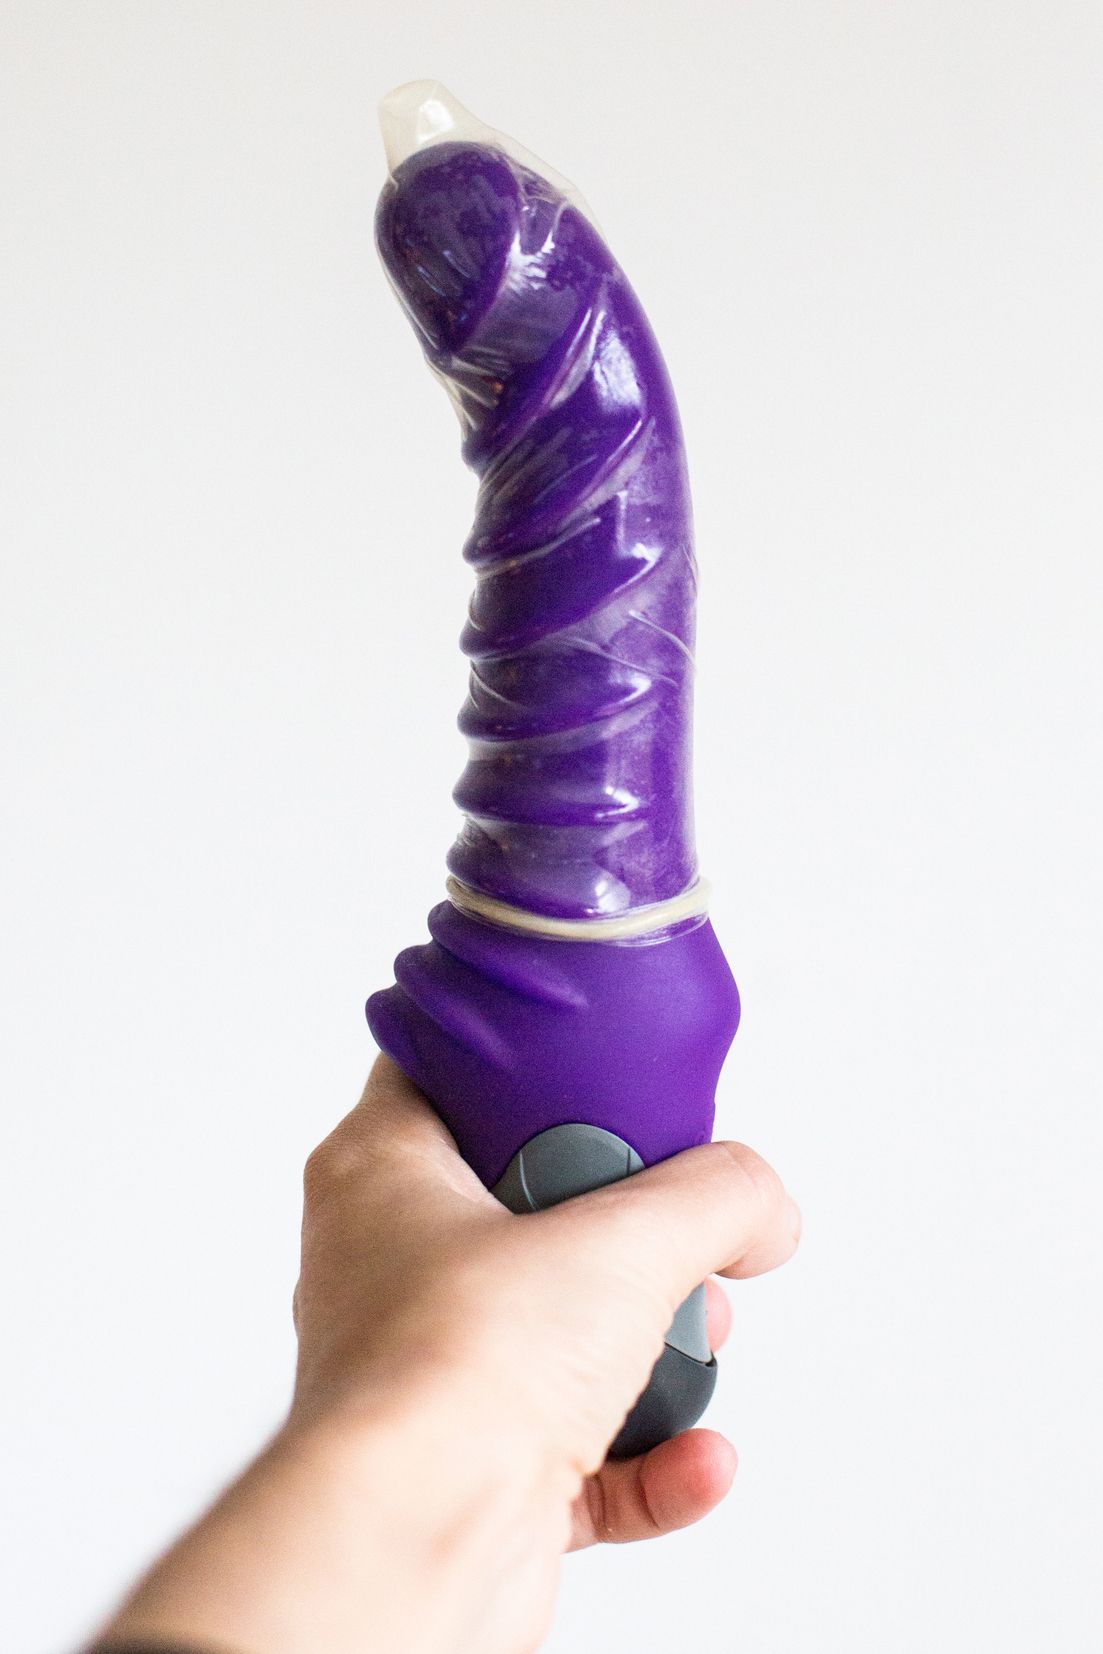 Things You Can Use As A Dildo